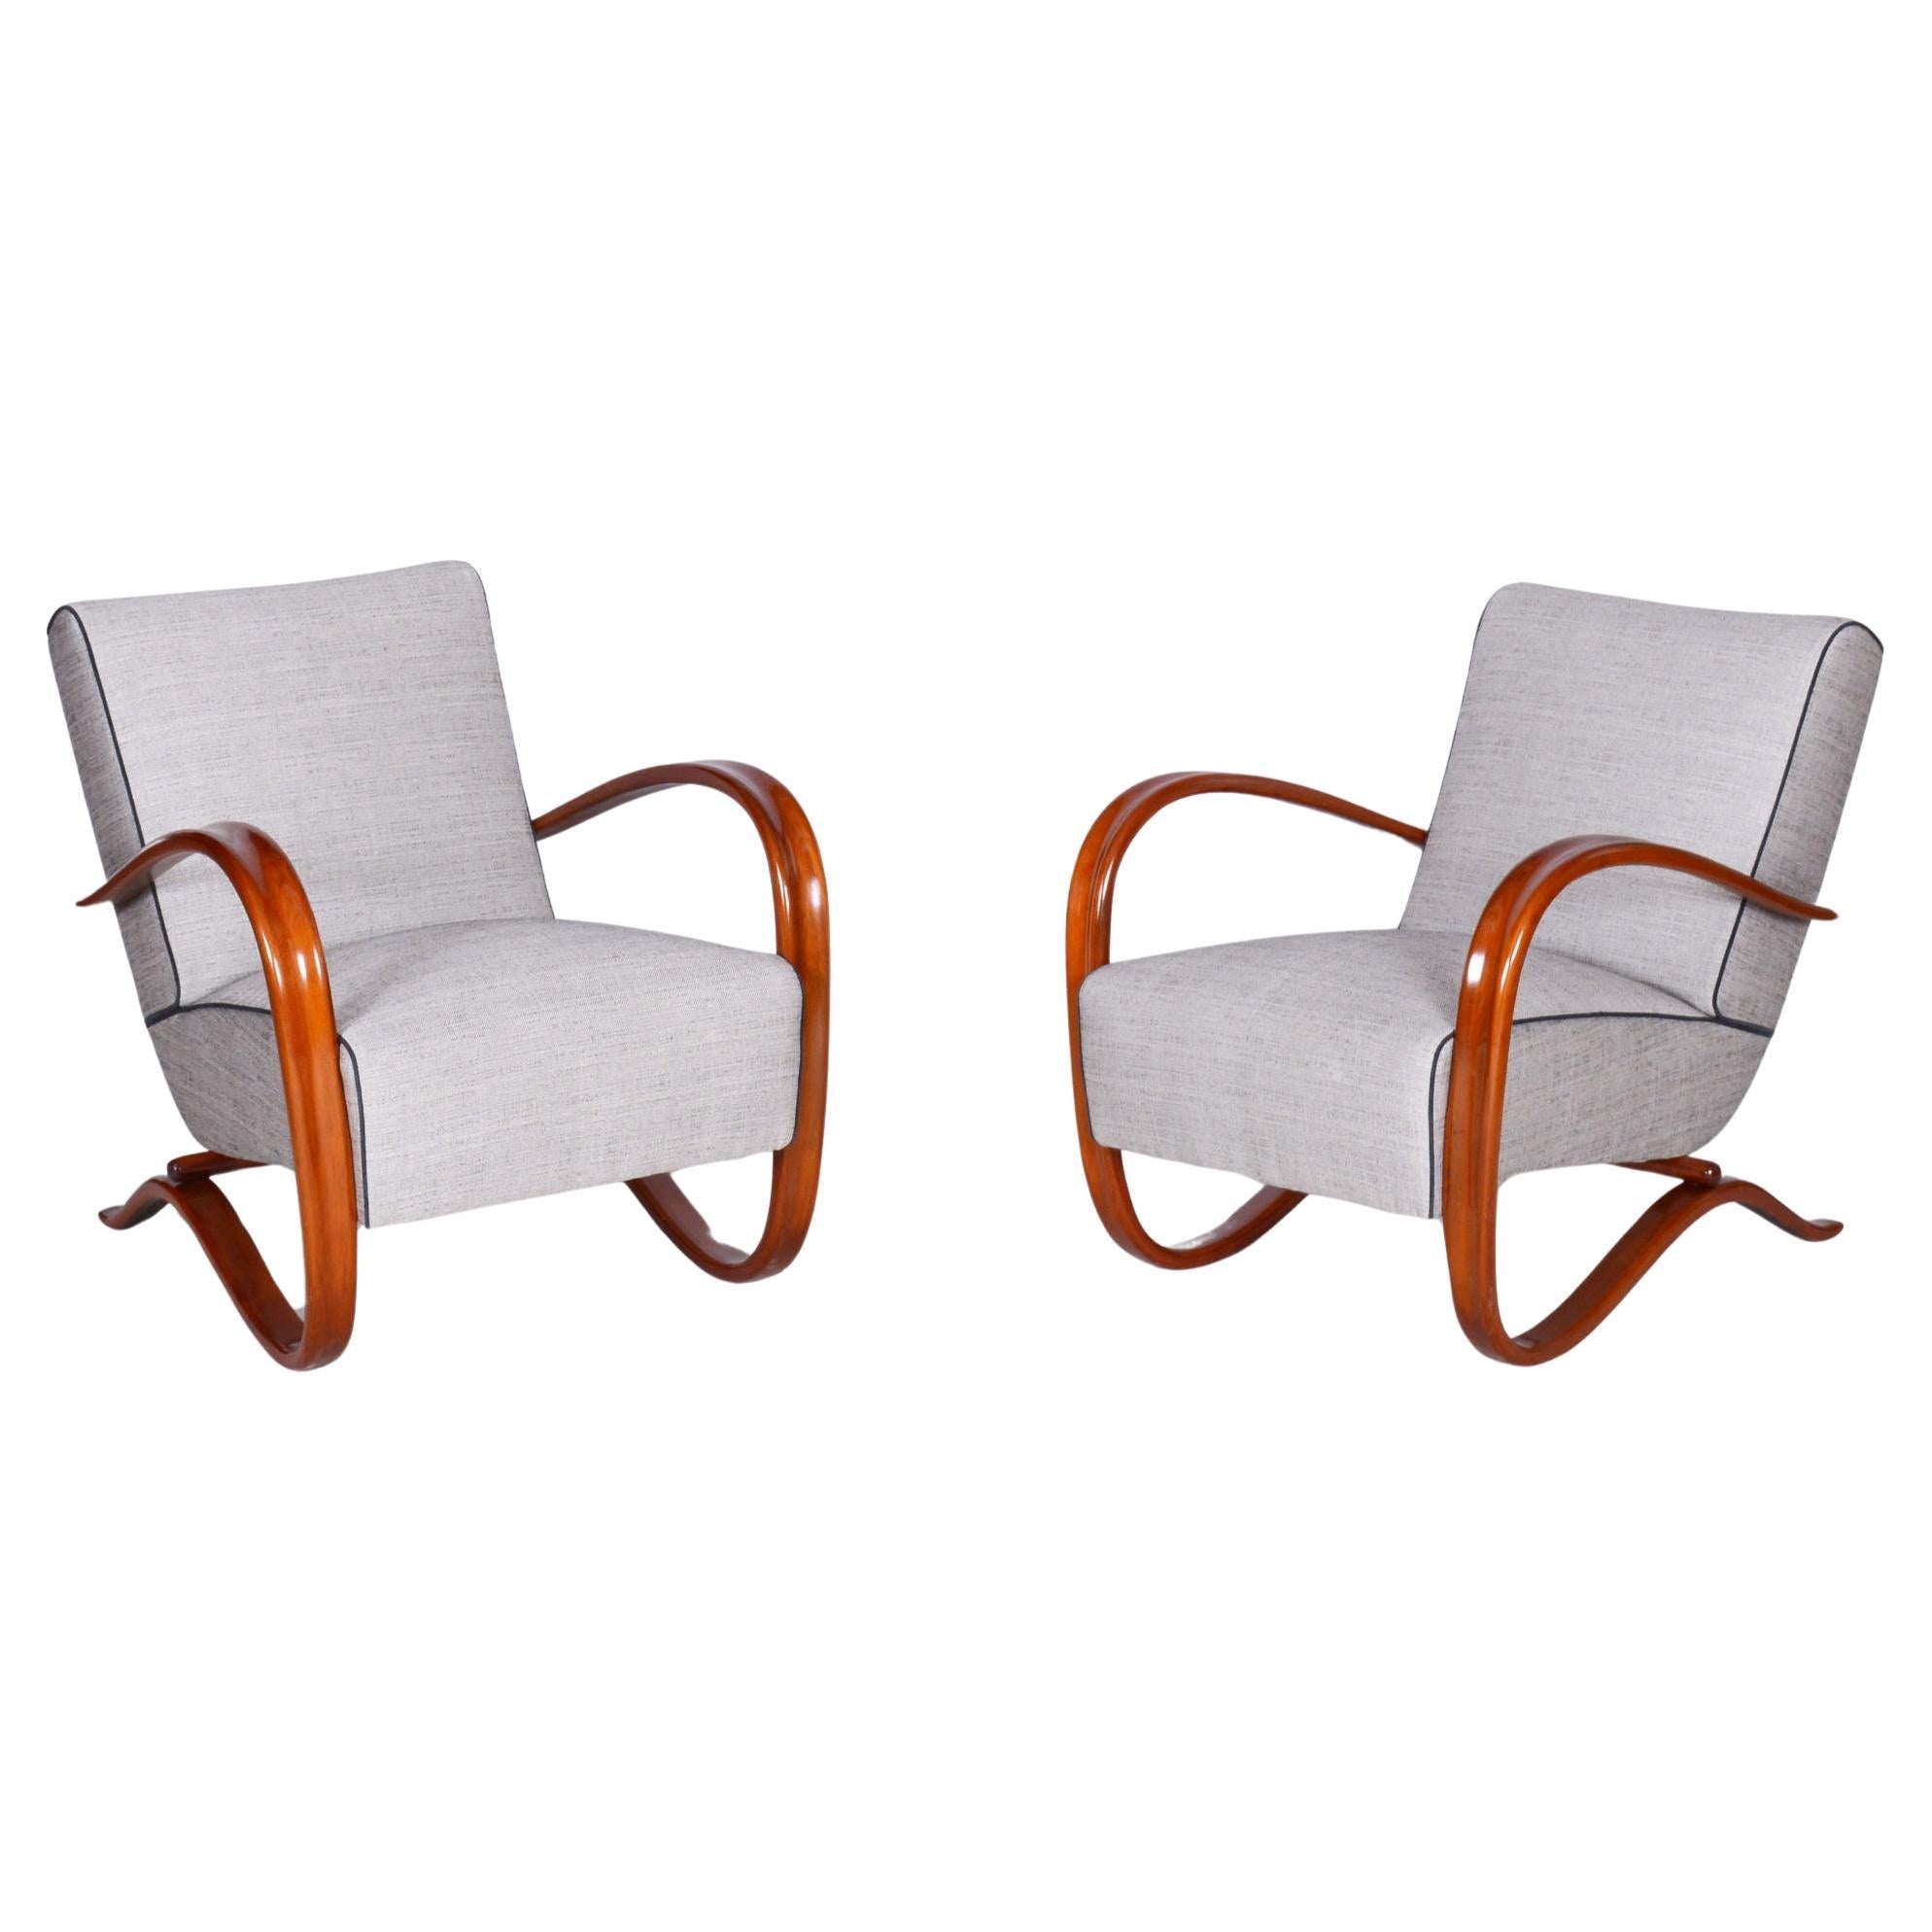 Pair of Restored H-269 Armchairs, by Jindrich Halabala, UP Zavody, Czech, 1930s For Sale